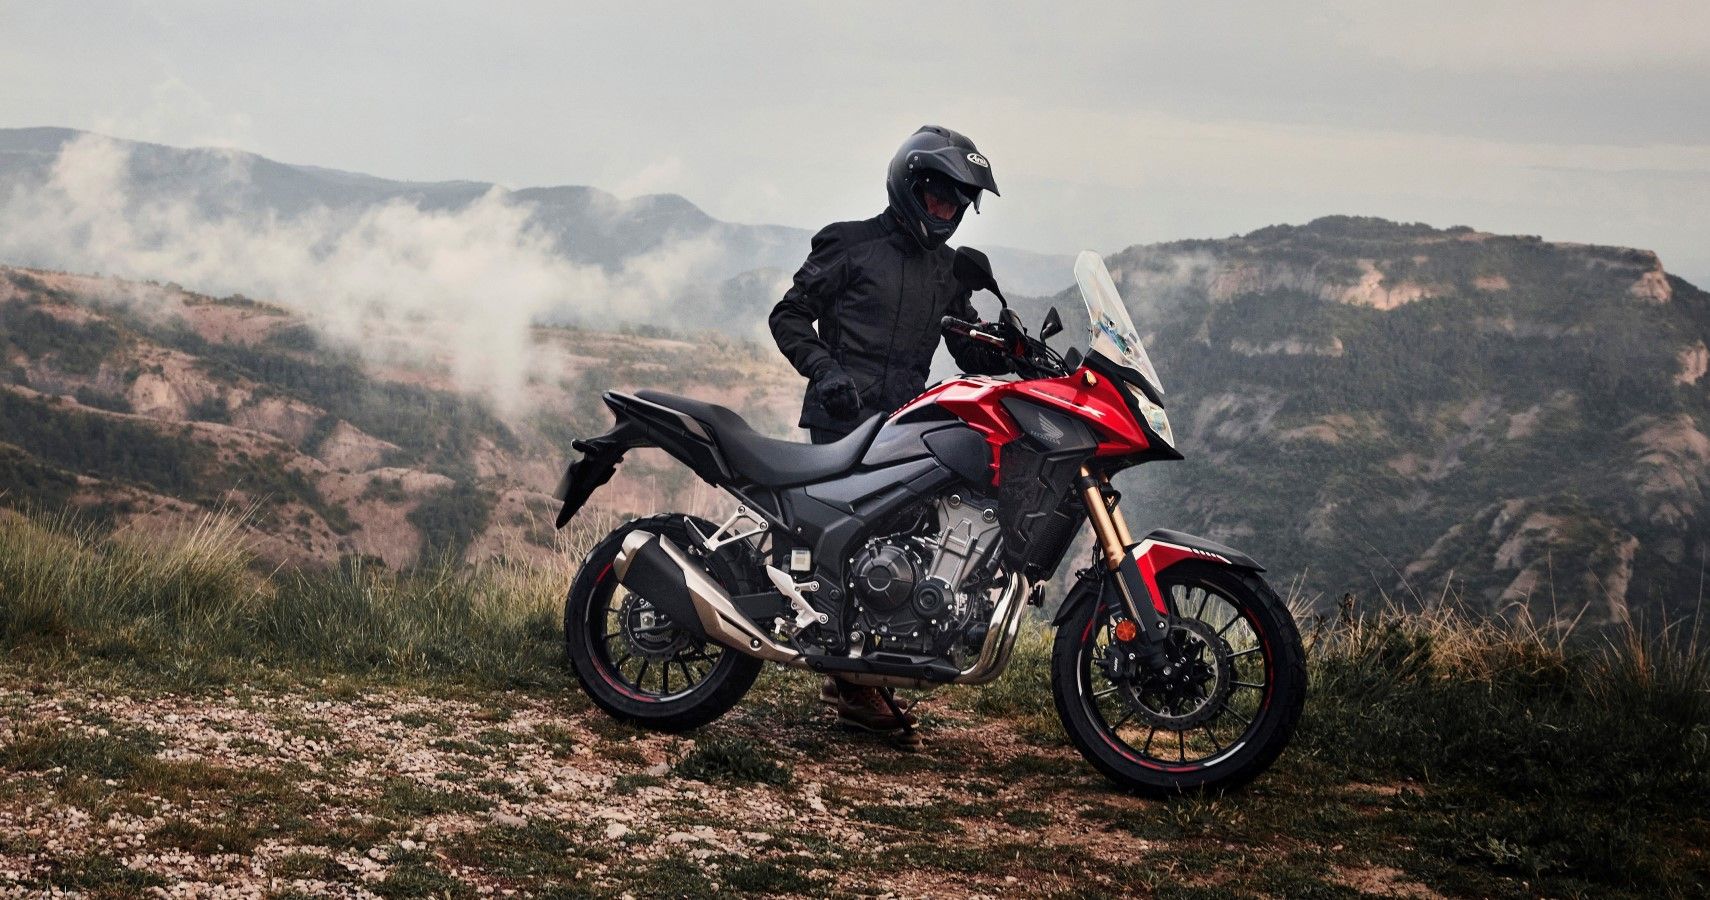 The Most Reliable Used Motorcycles Under $10,000